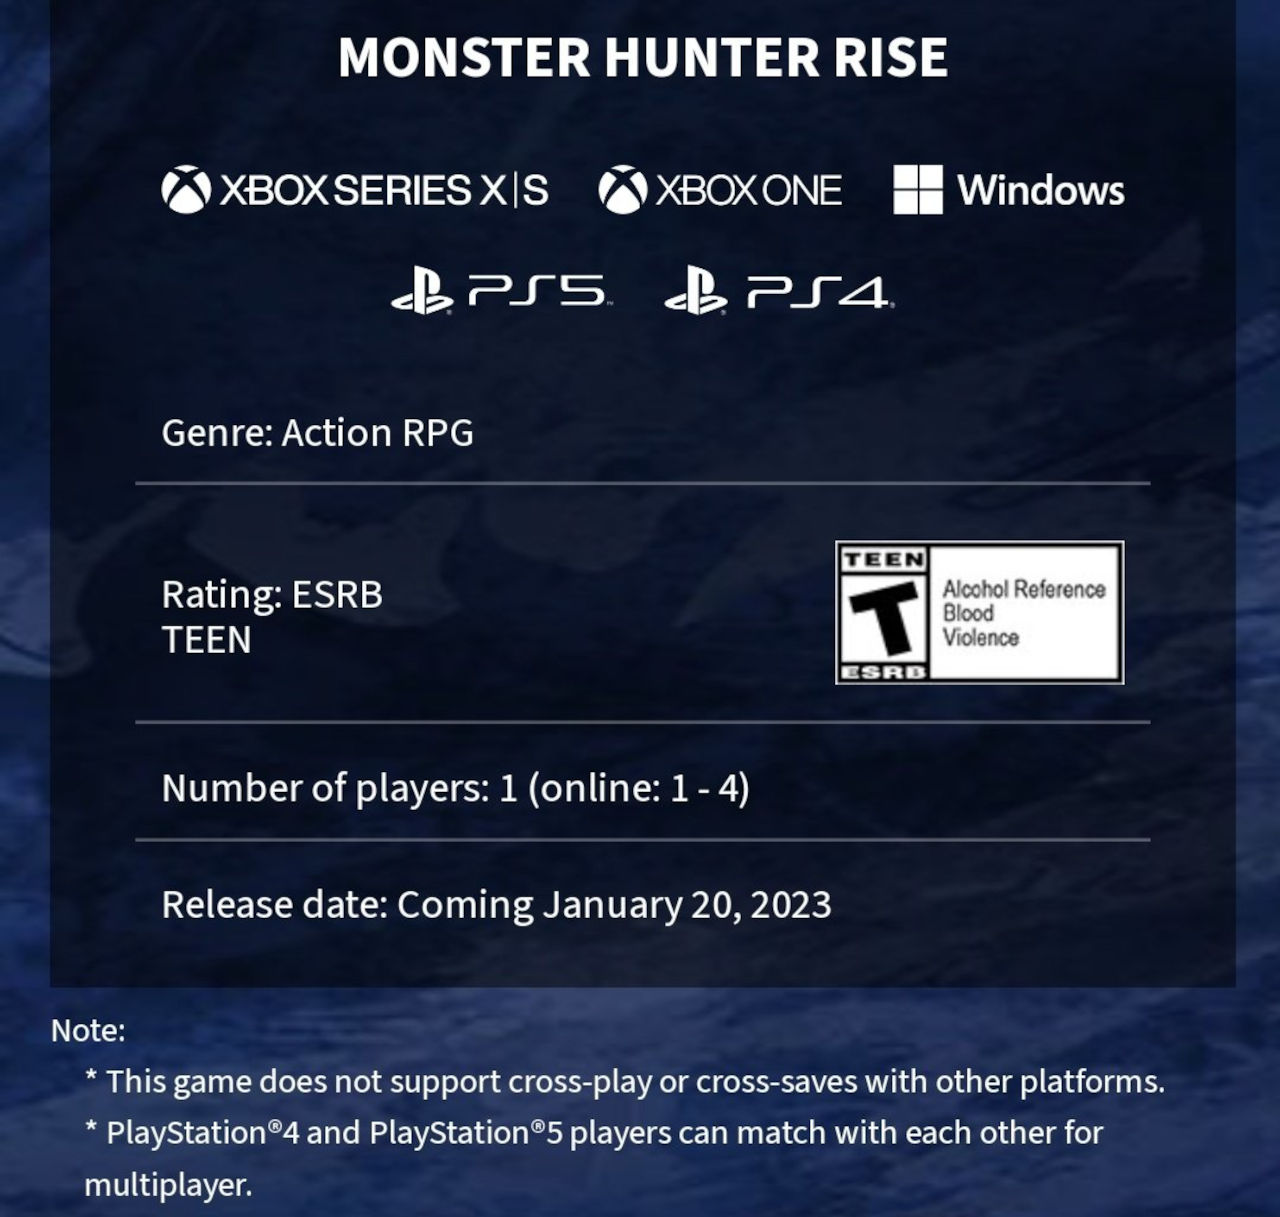 Monster Hunter Rise will not have crossplay between consoles